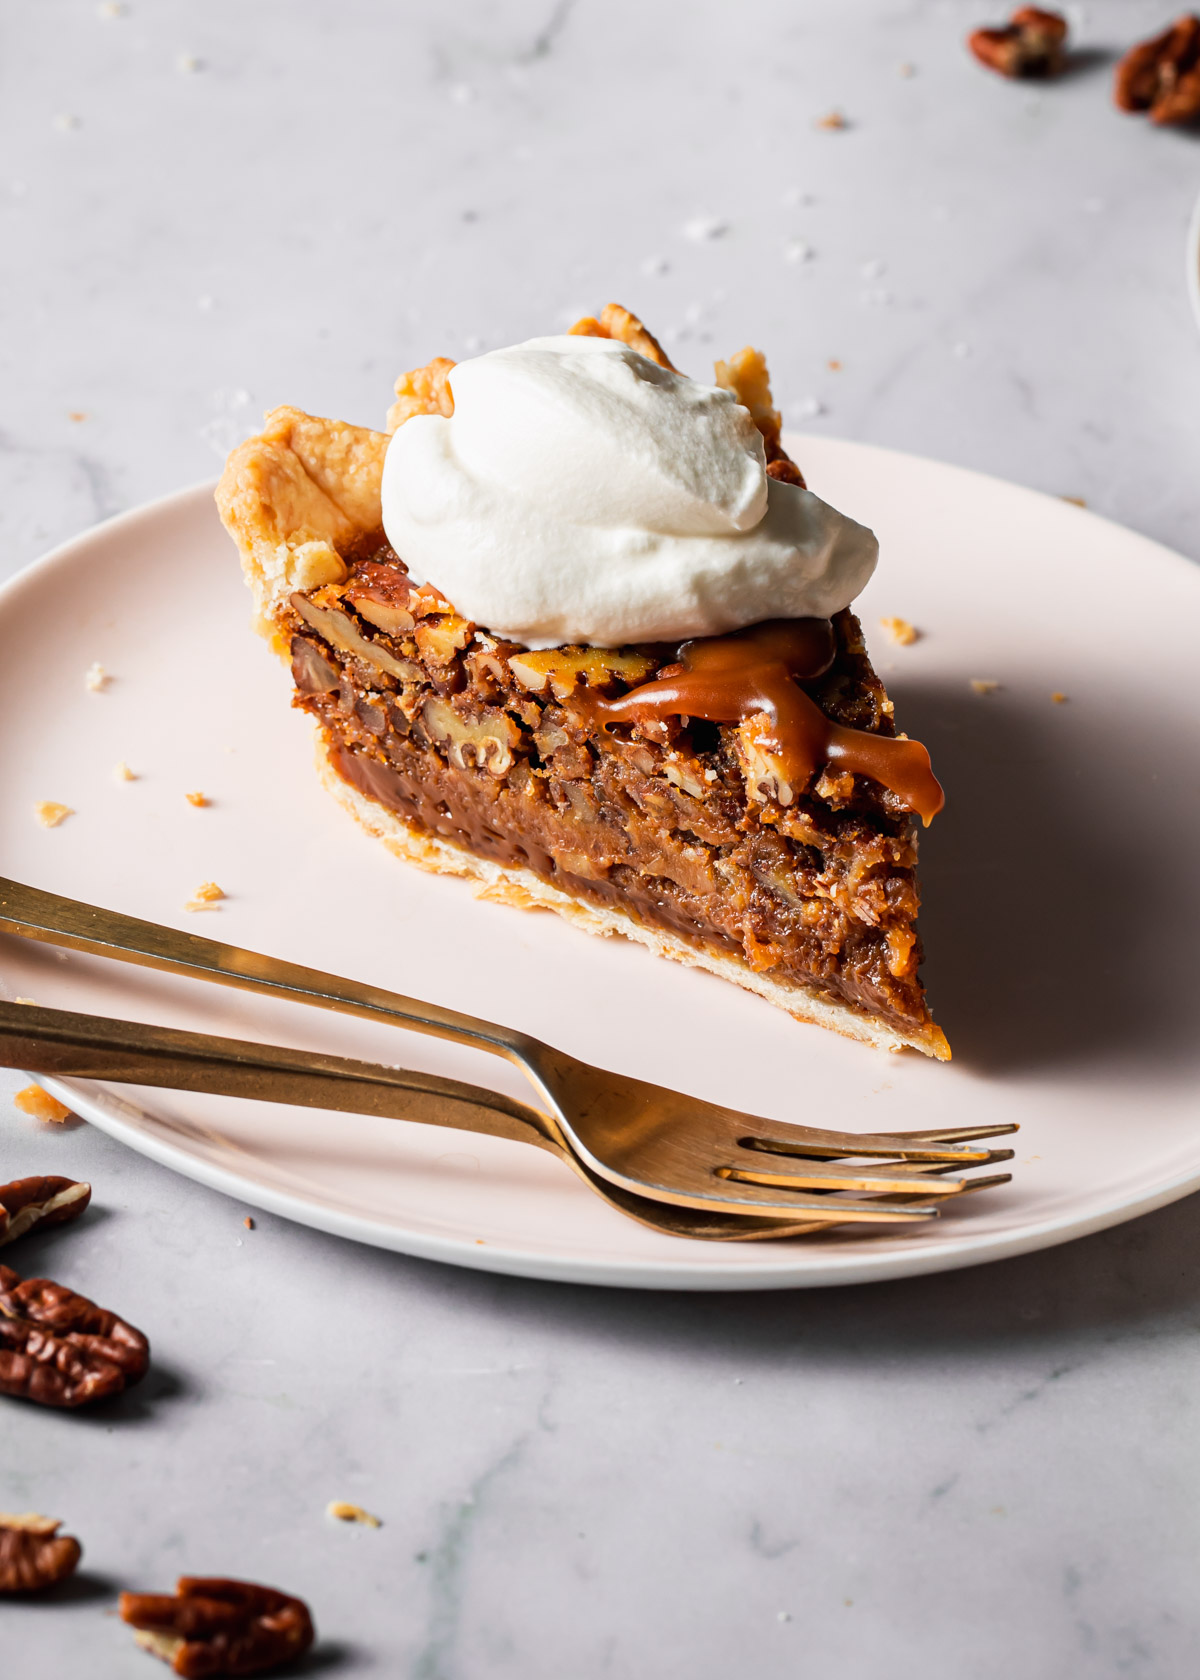 A slice of pecan pie with whipped cream on top